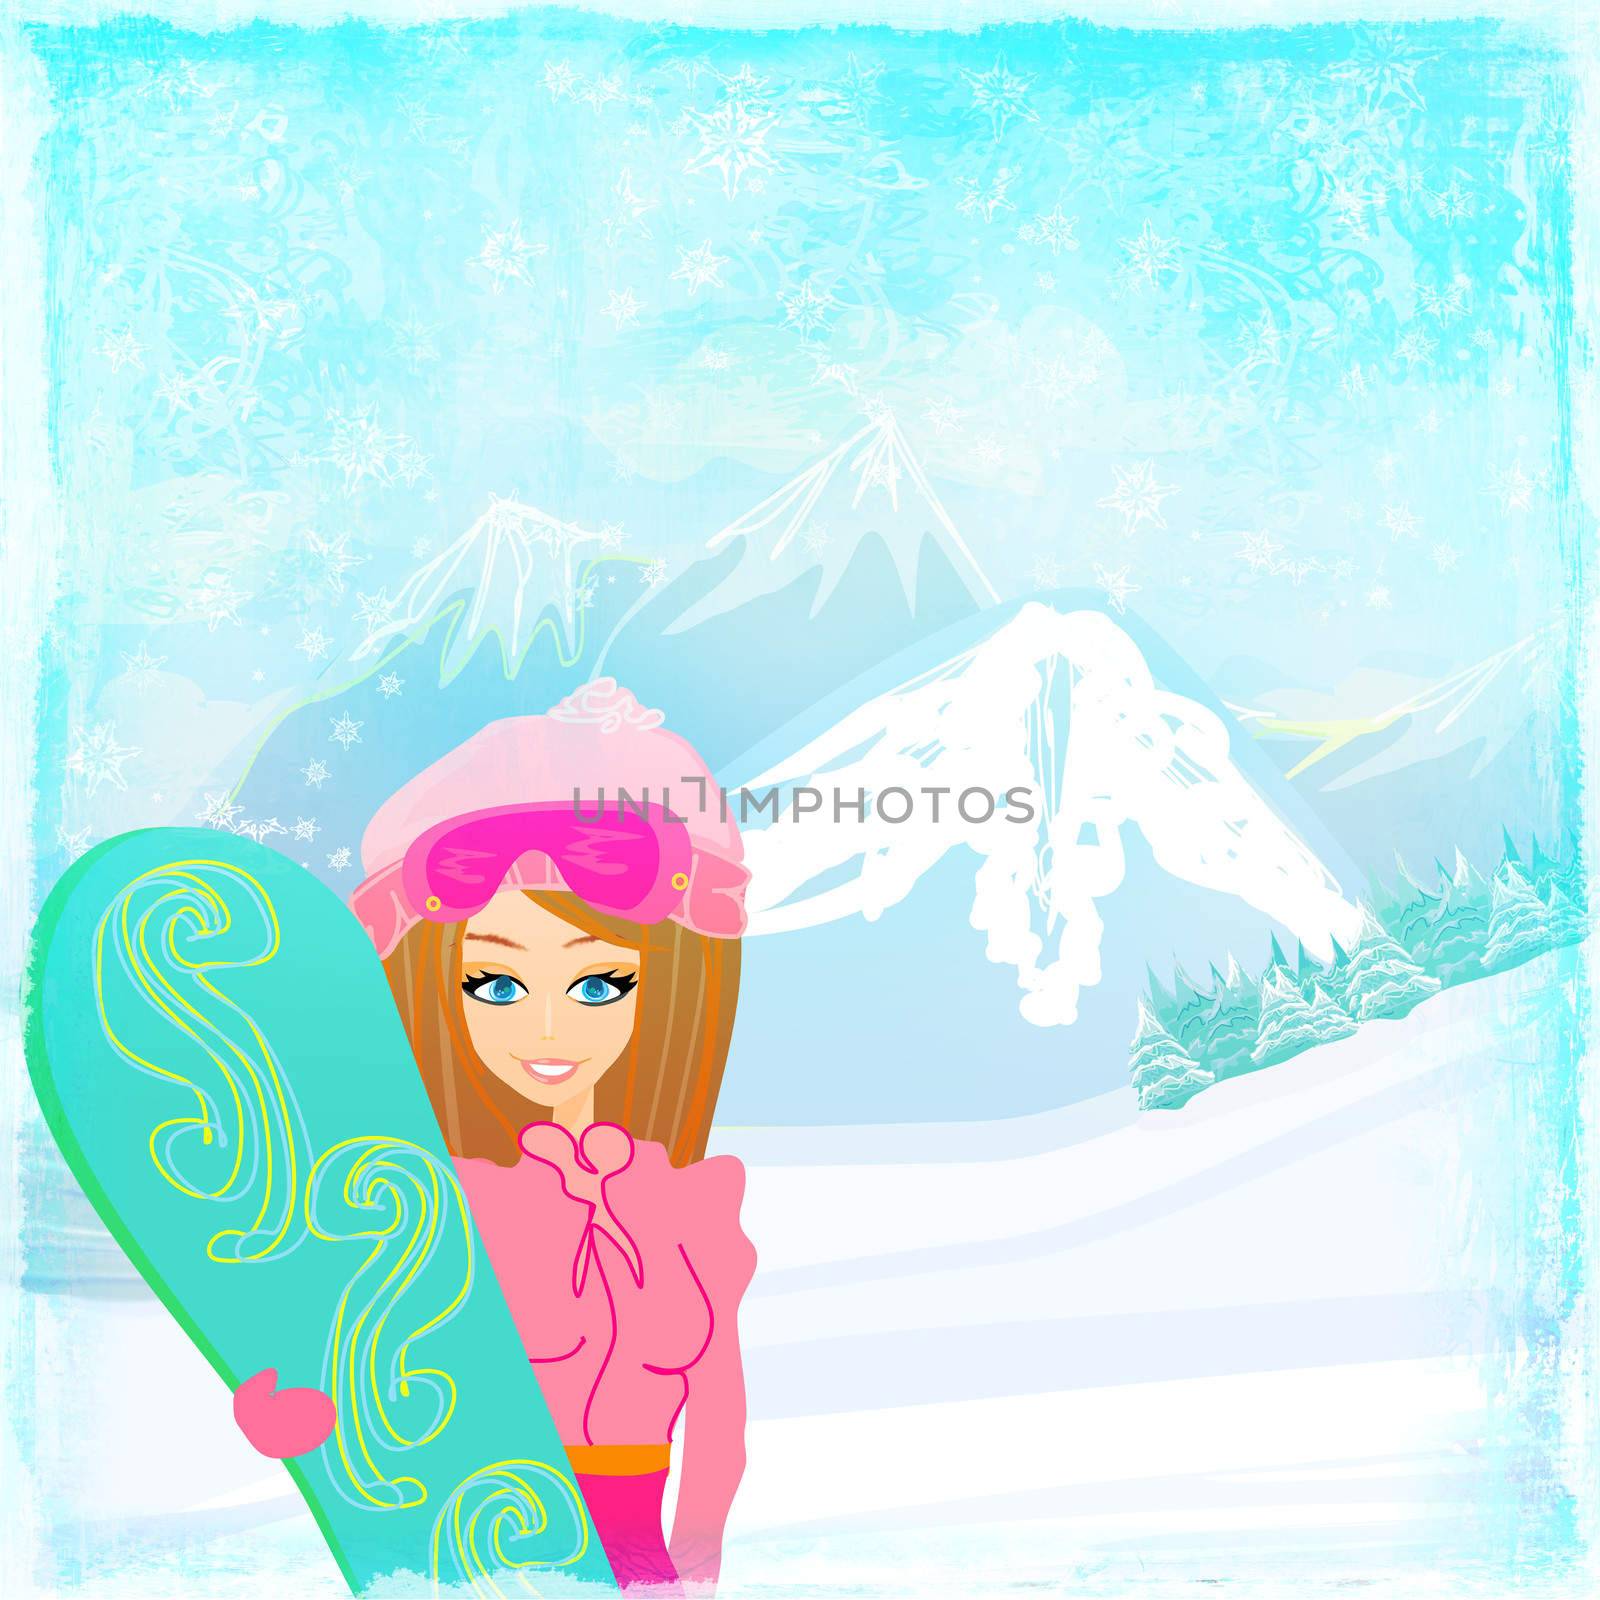 Girl with the snowboard by JackyBrown